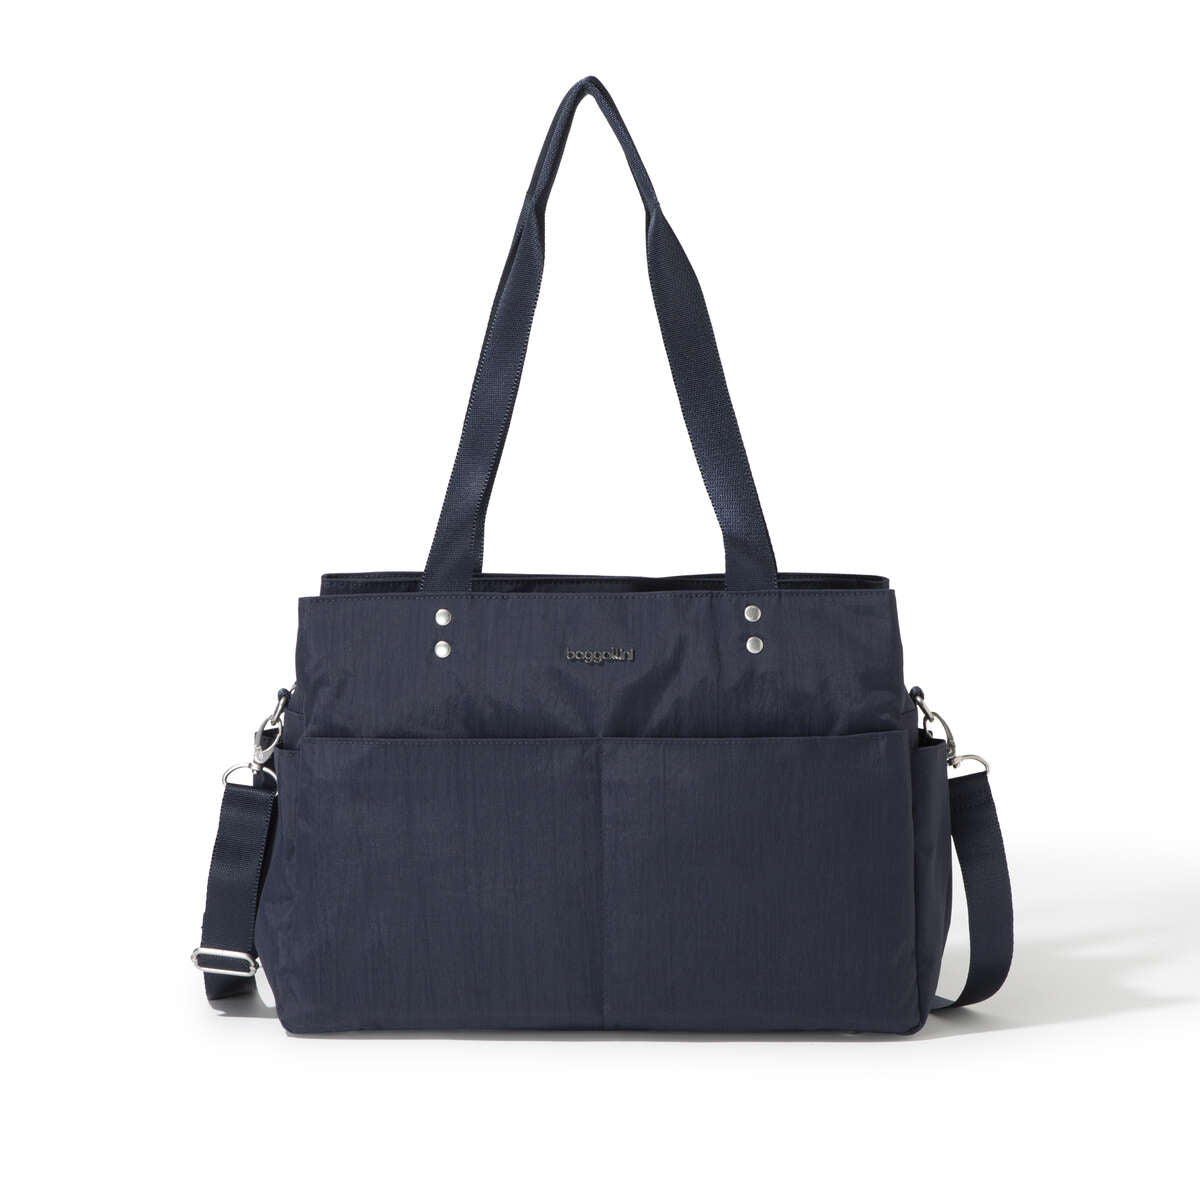 Baggallini "The Only Bag"Tote